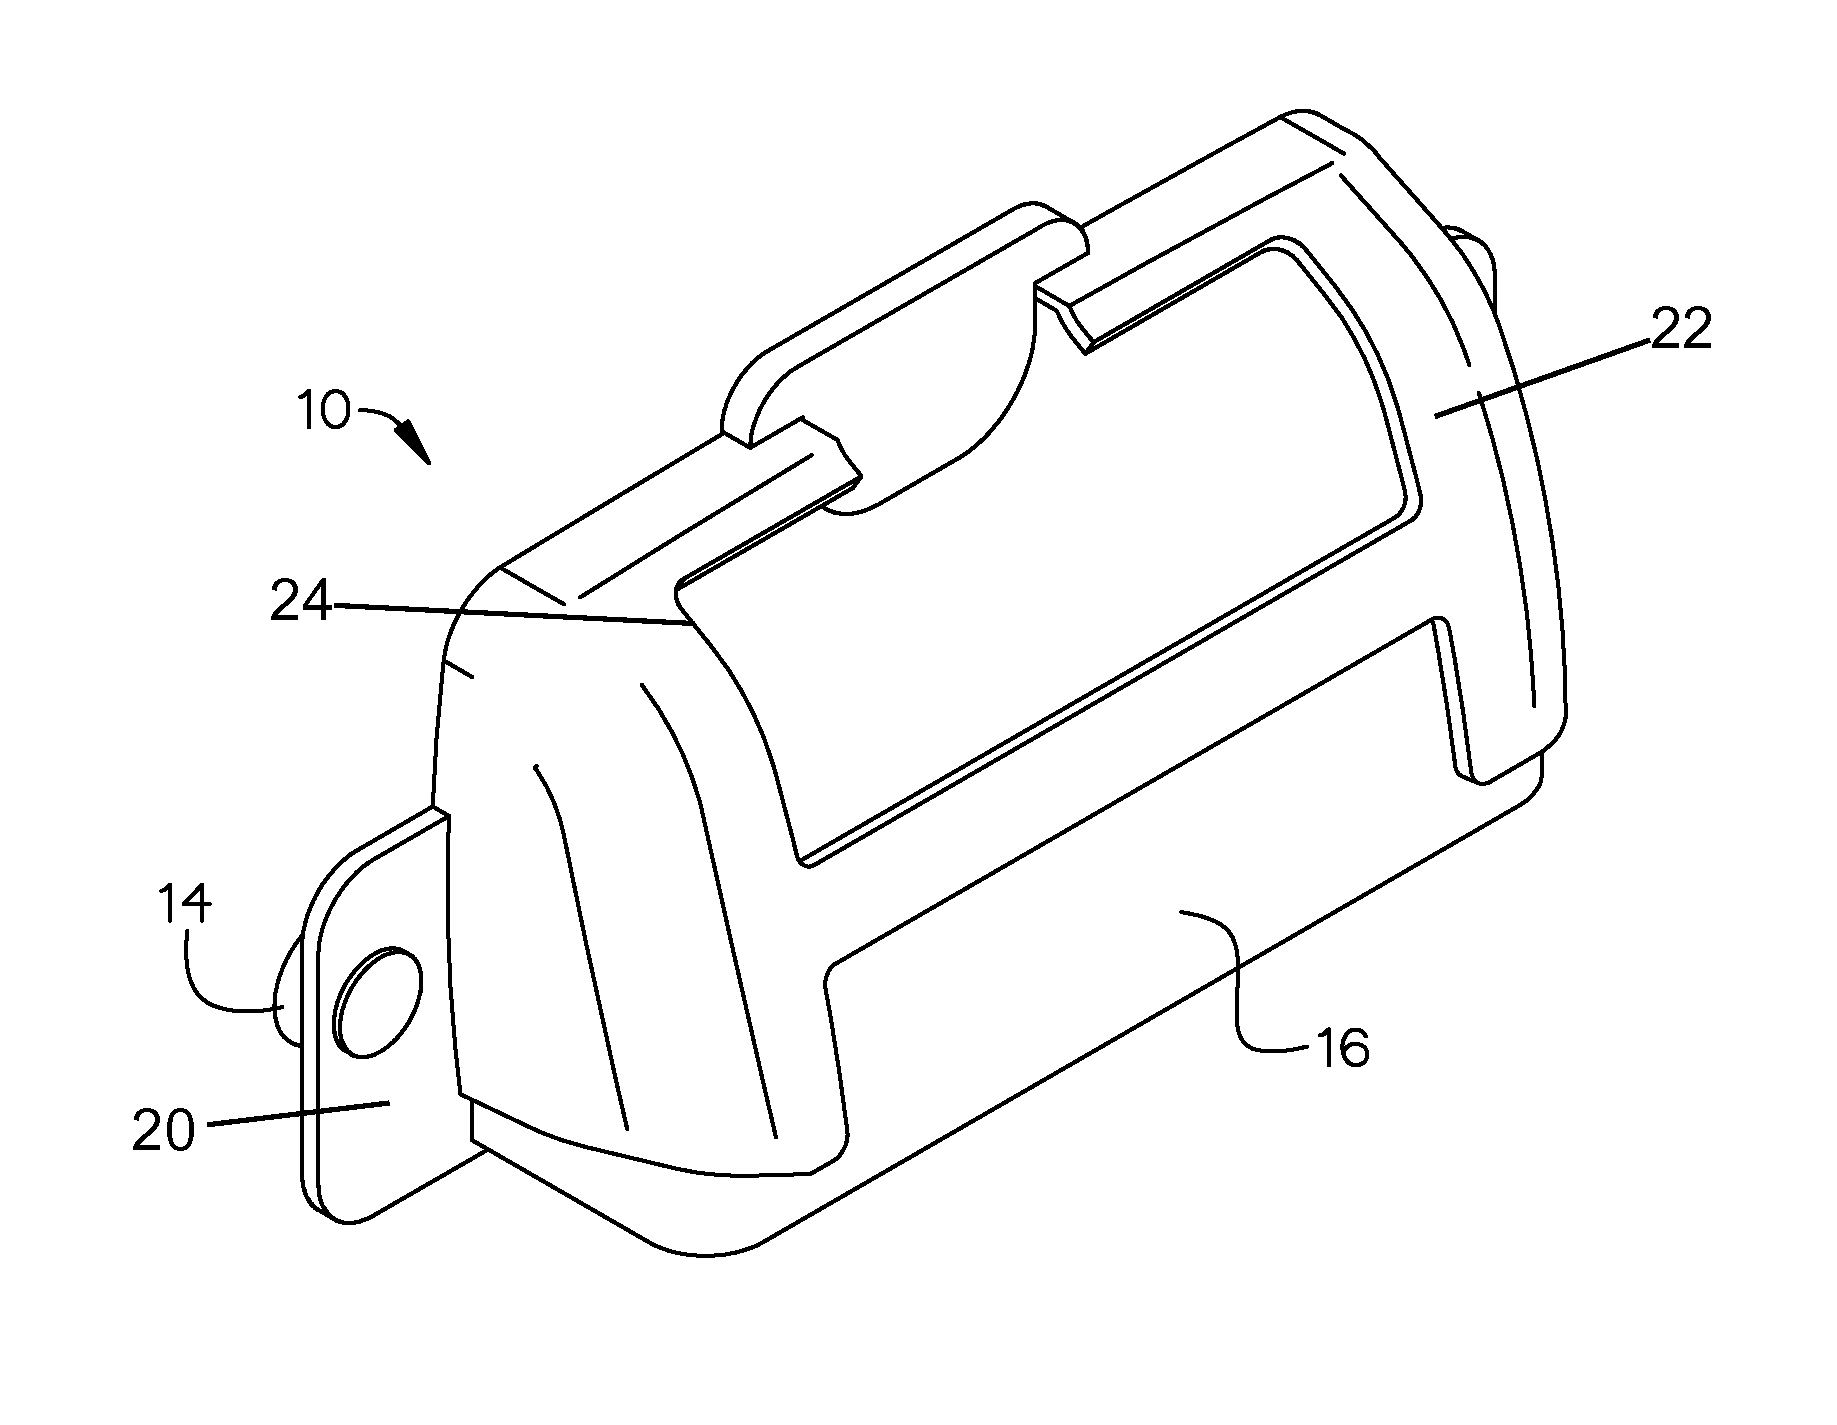 Electronic tag holding device